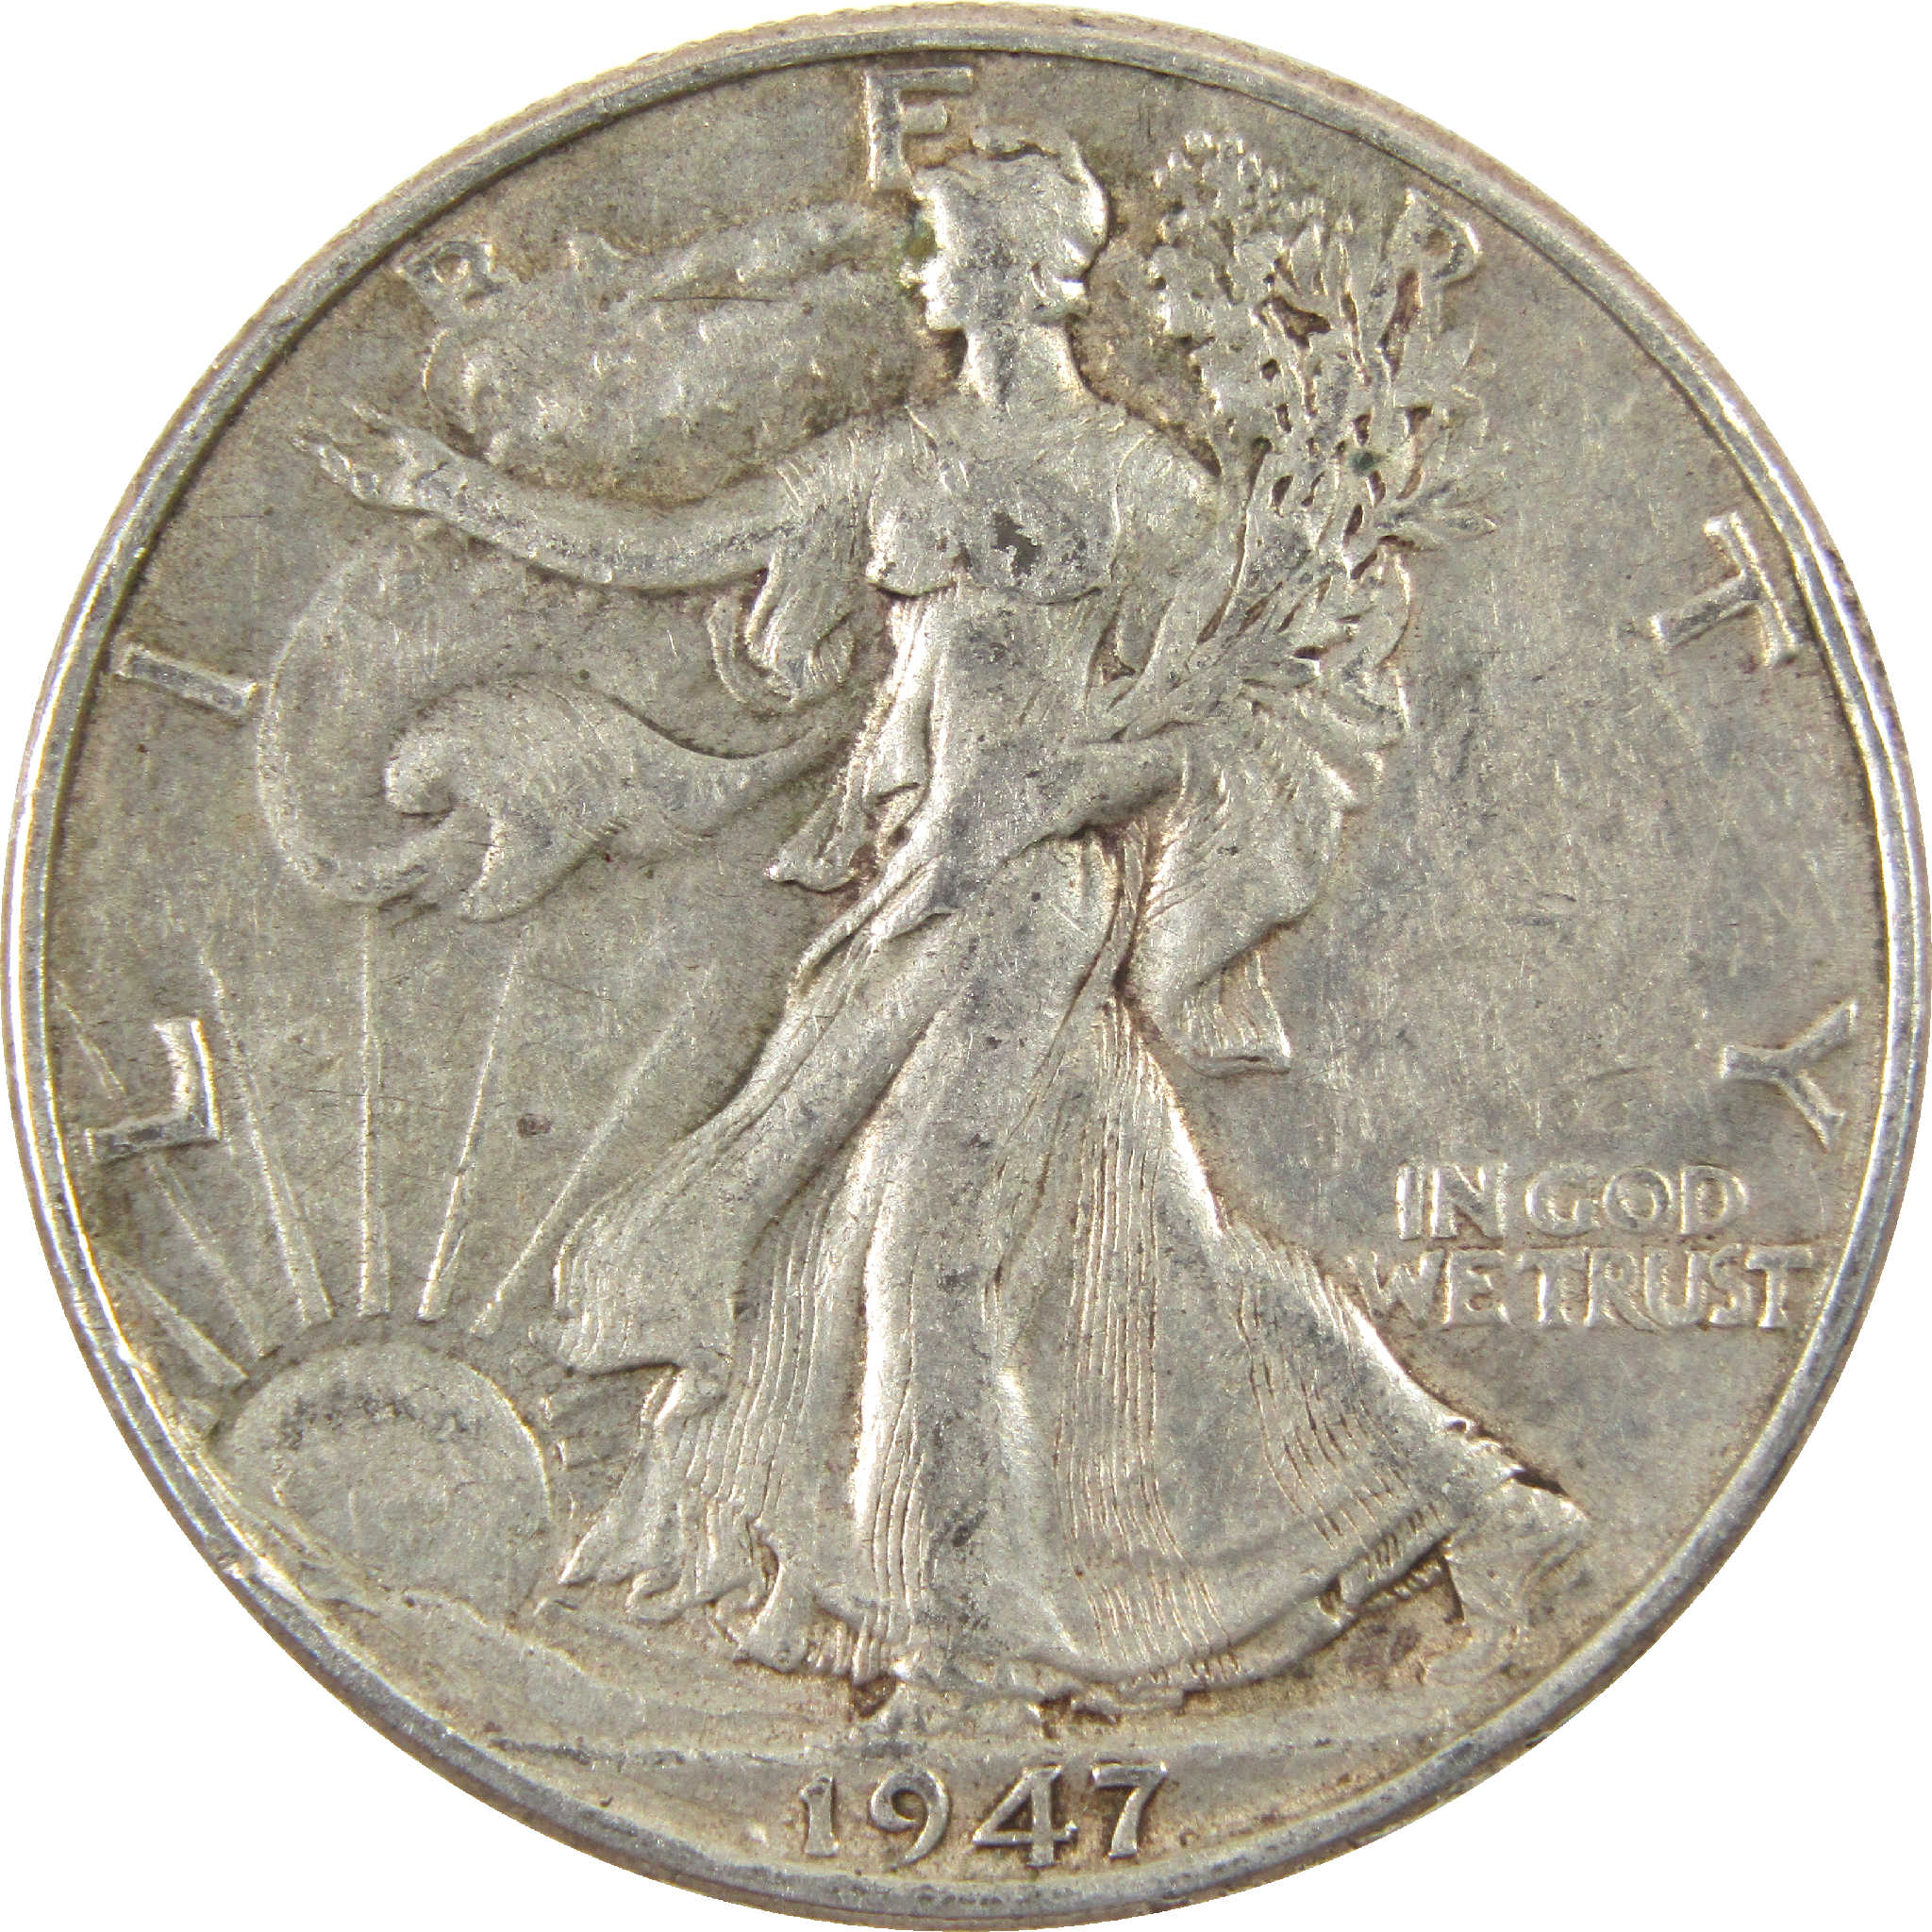 1947 Liberty Walking Half Dollar XF EF Extremely Fine Silver 50c Coin